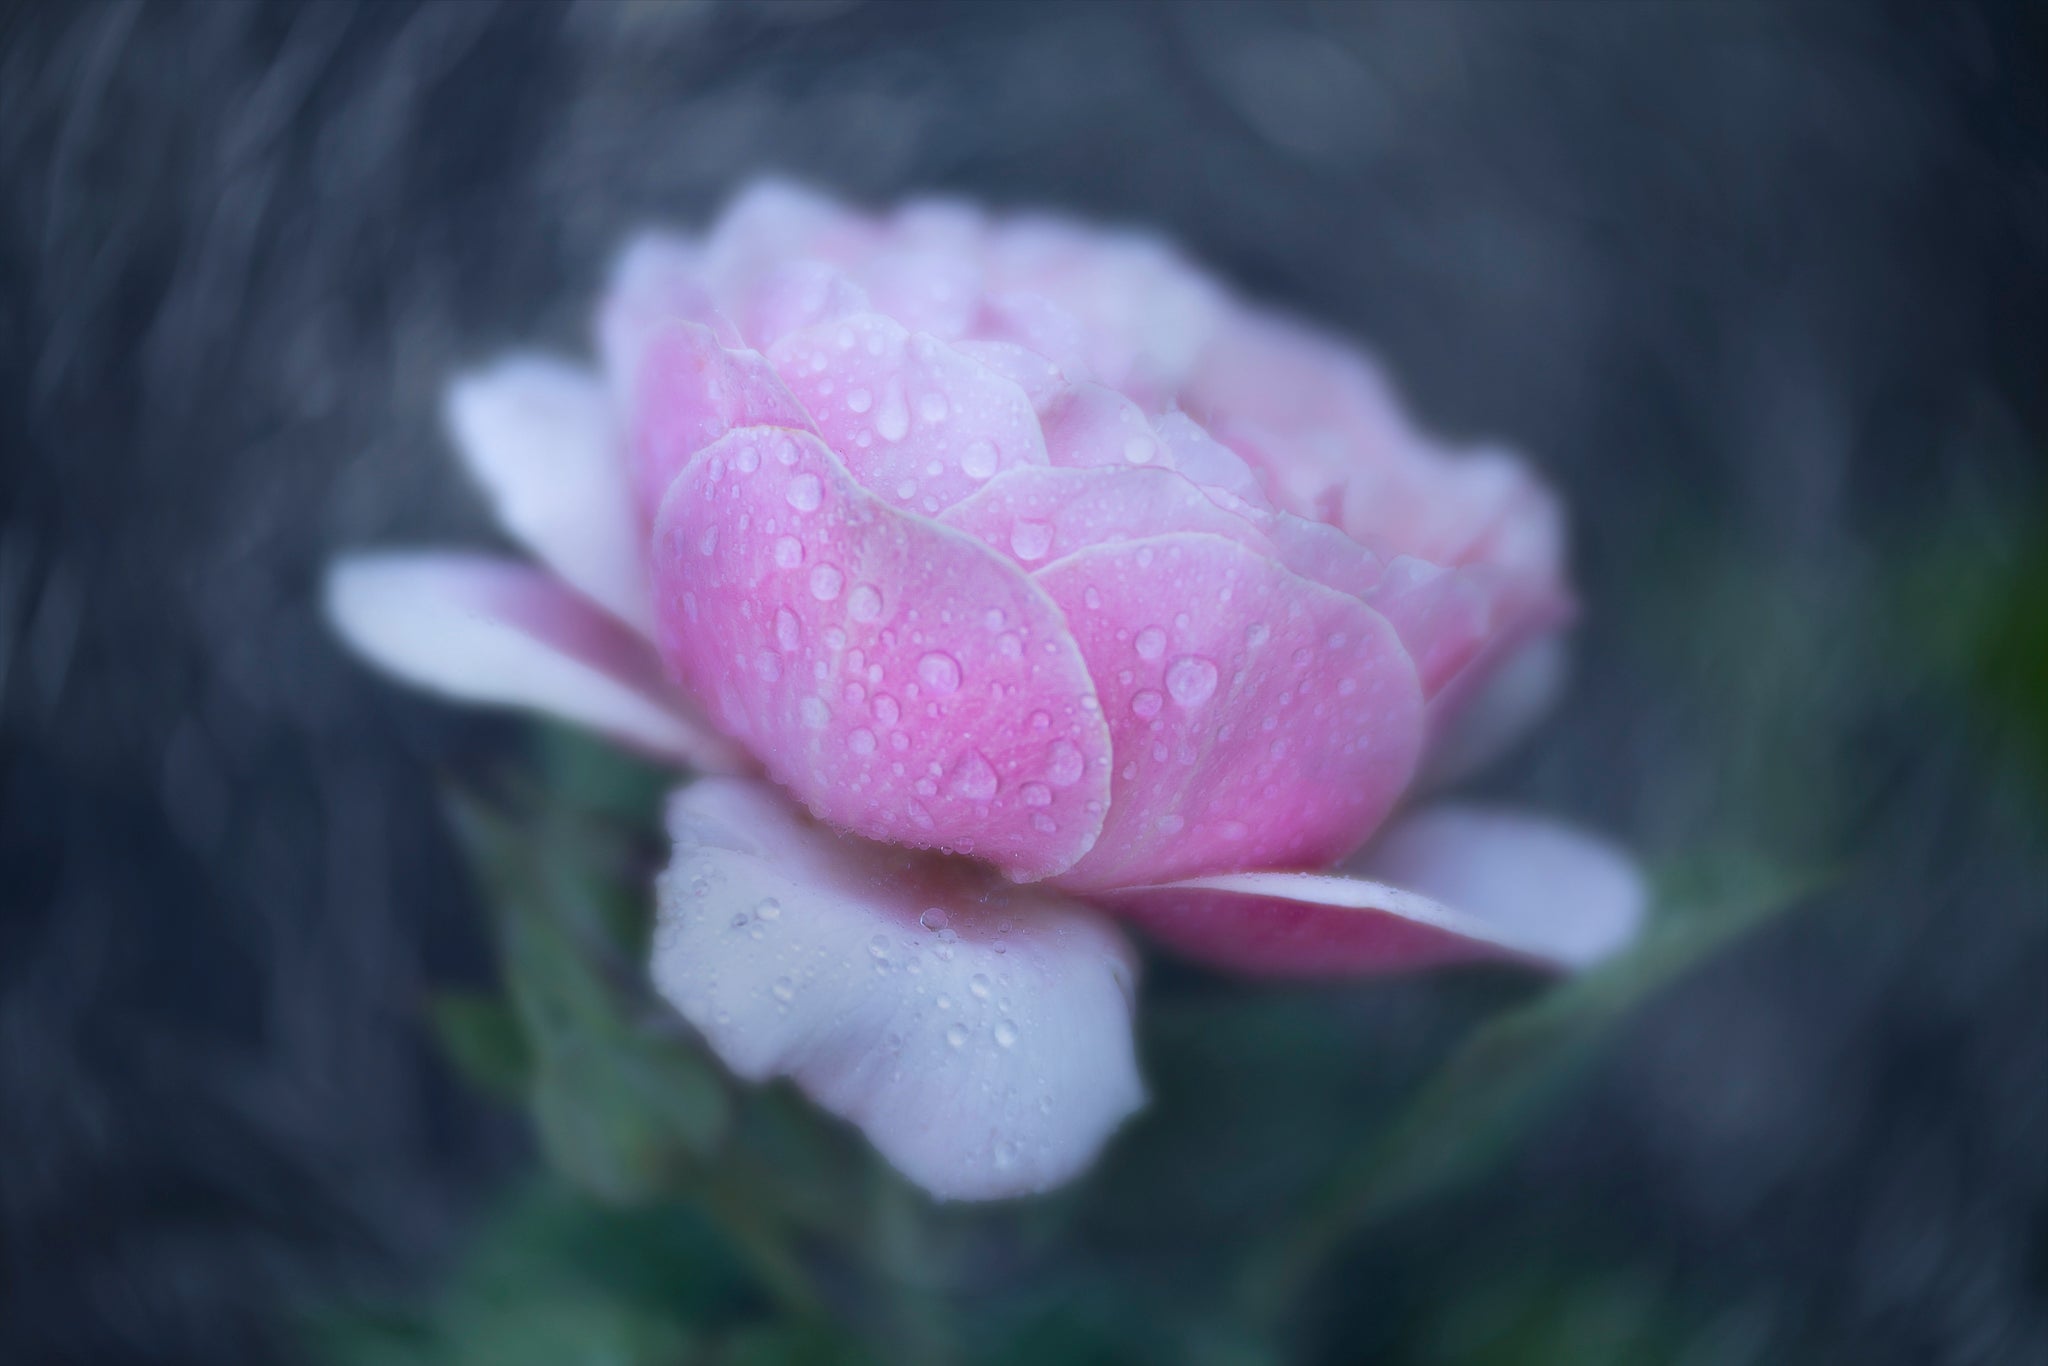 Flower photograph for Pink rose with raindrops by Cameron Dreaux. 